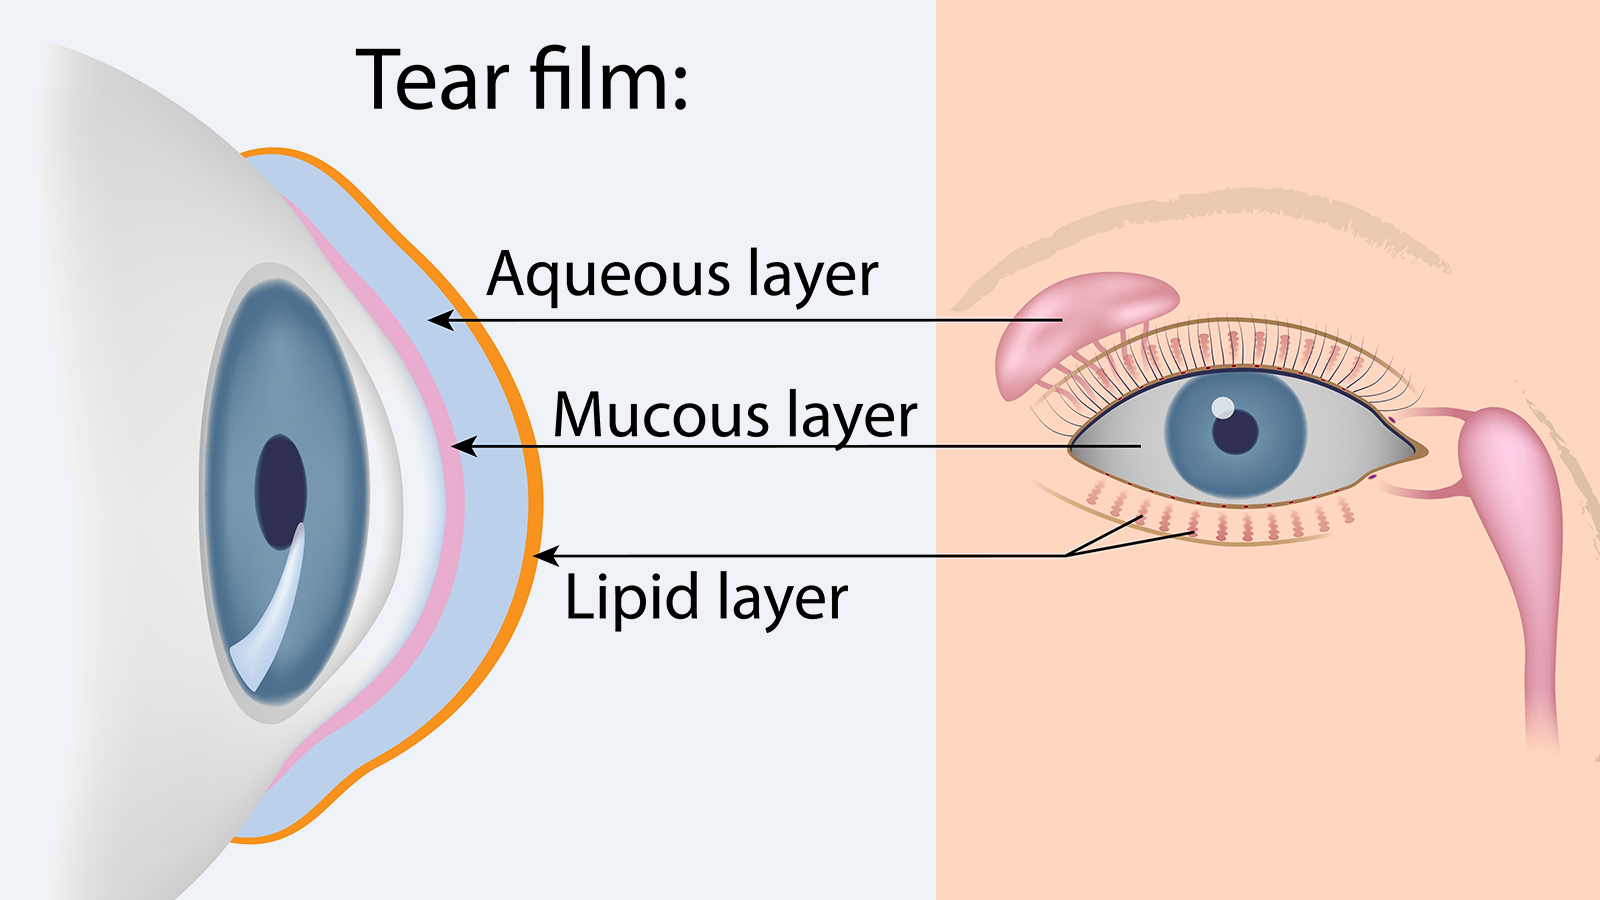 What is a tear film?